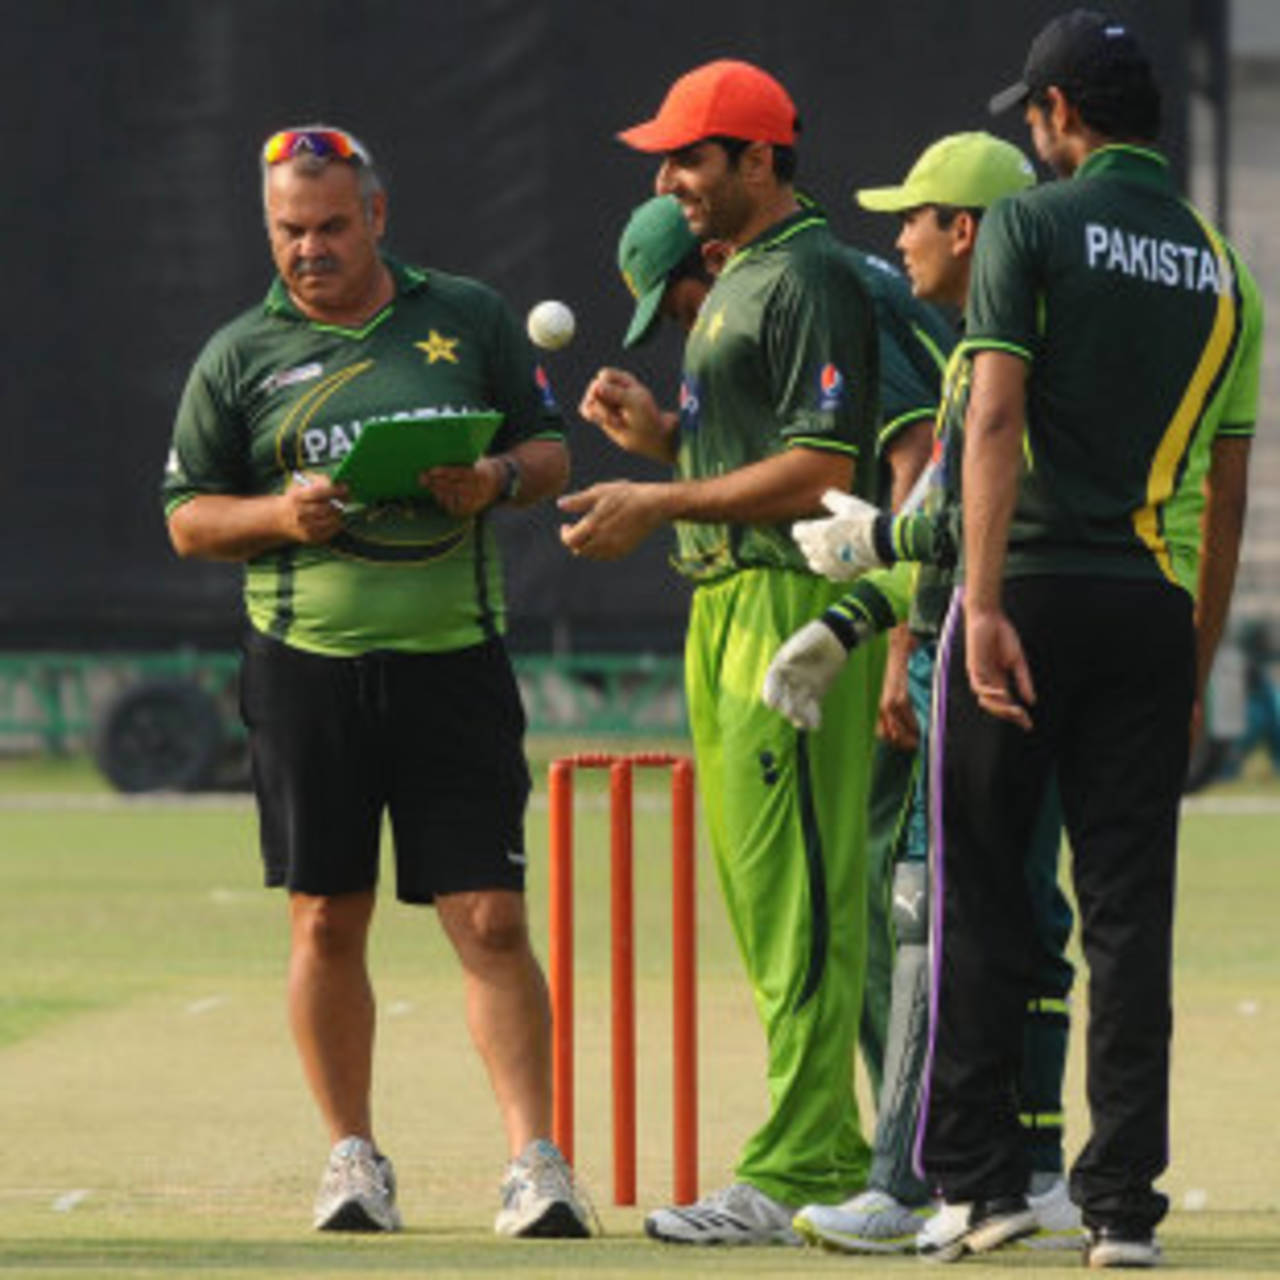 Dav Whatmore with Misbah-ul-Haq and other Pakistan players at a training camp at the Gaddafi stadium, Lahore, April 19, 2012